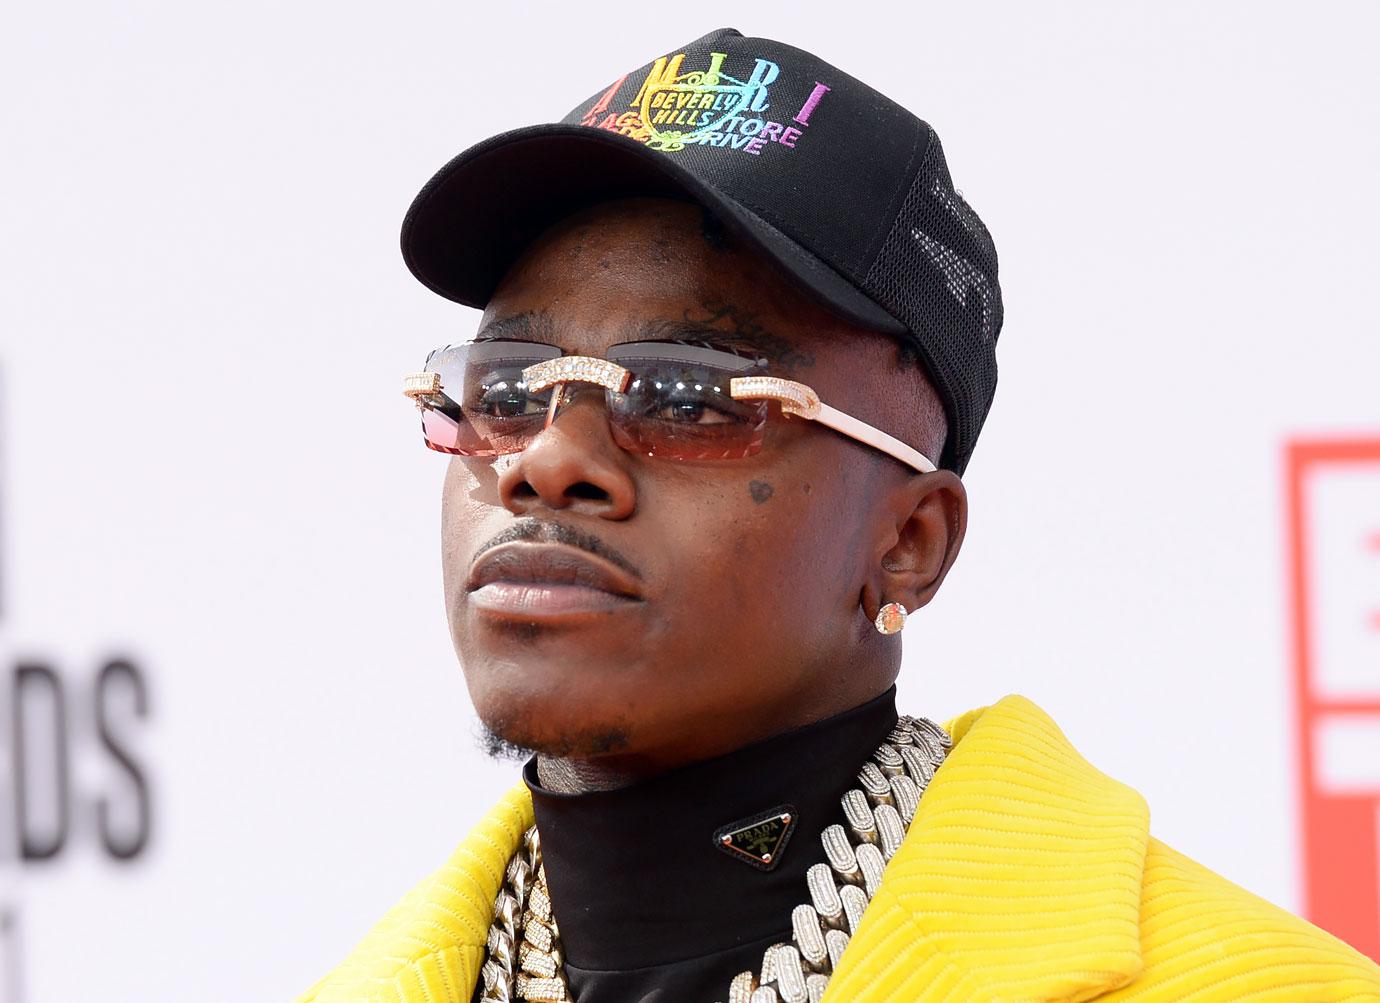 All the festivals that dropped DaBaby after homophobic rant - Los